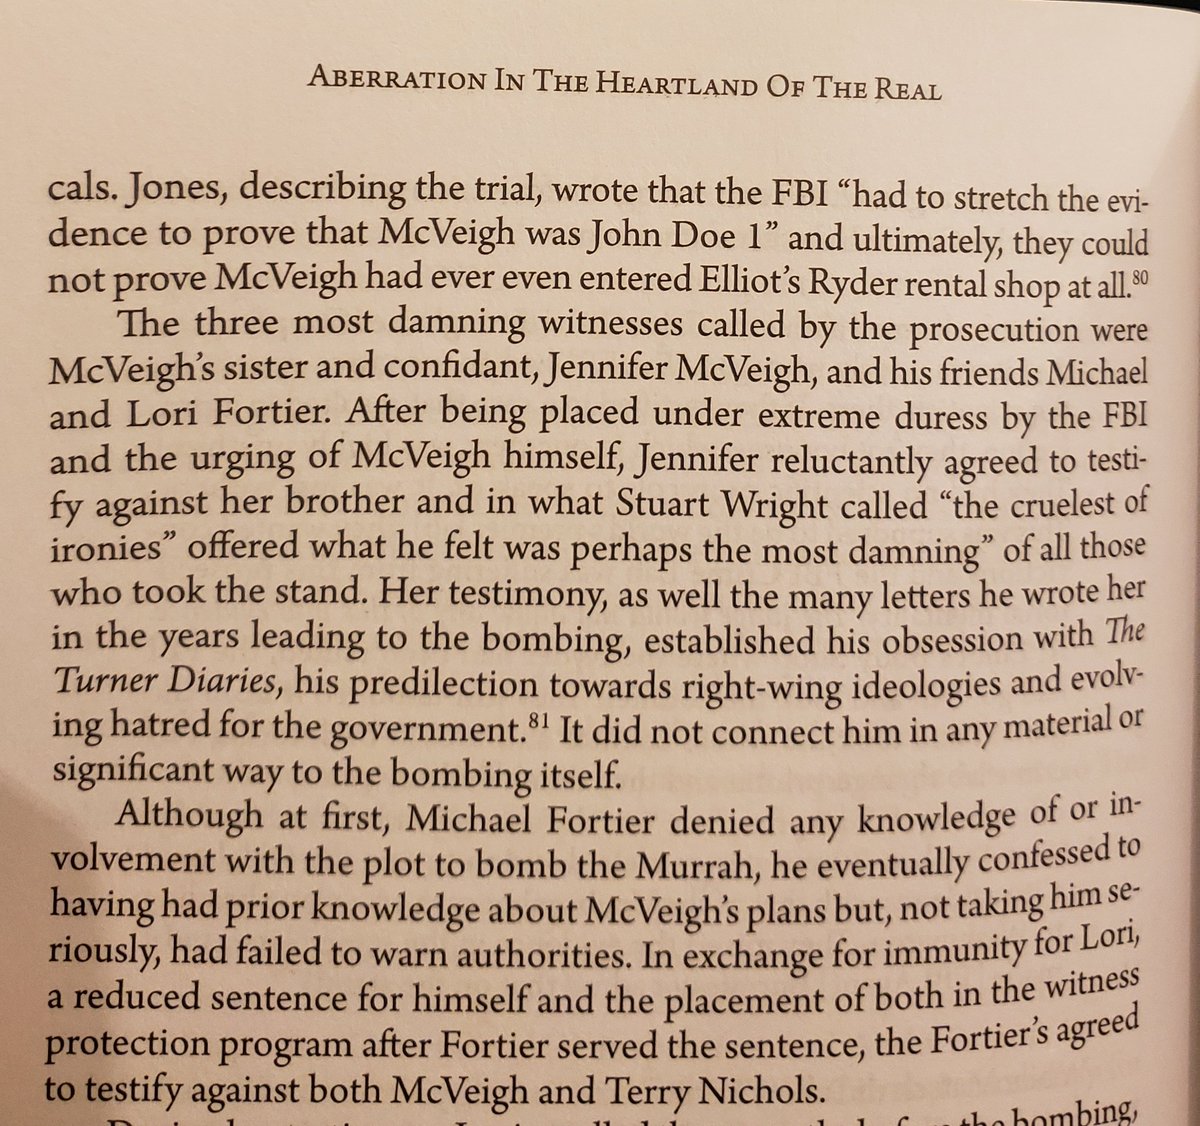 The prosecution's three star witnesses were character witnesses, essentially. None of the three tied McVeigh to the bomb plot in a concrete, material way.